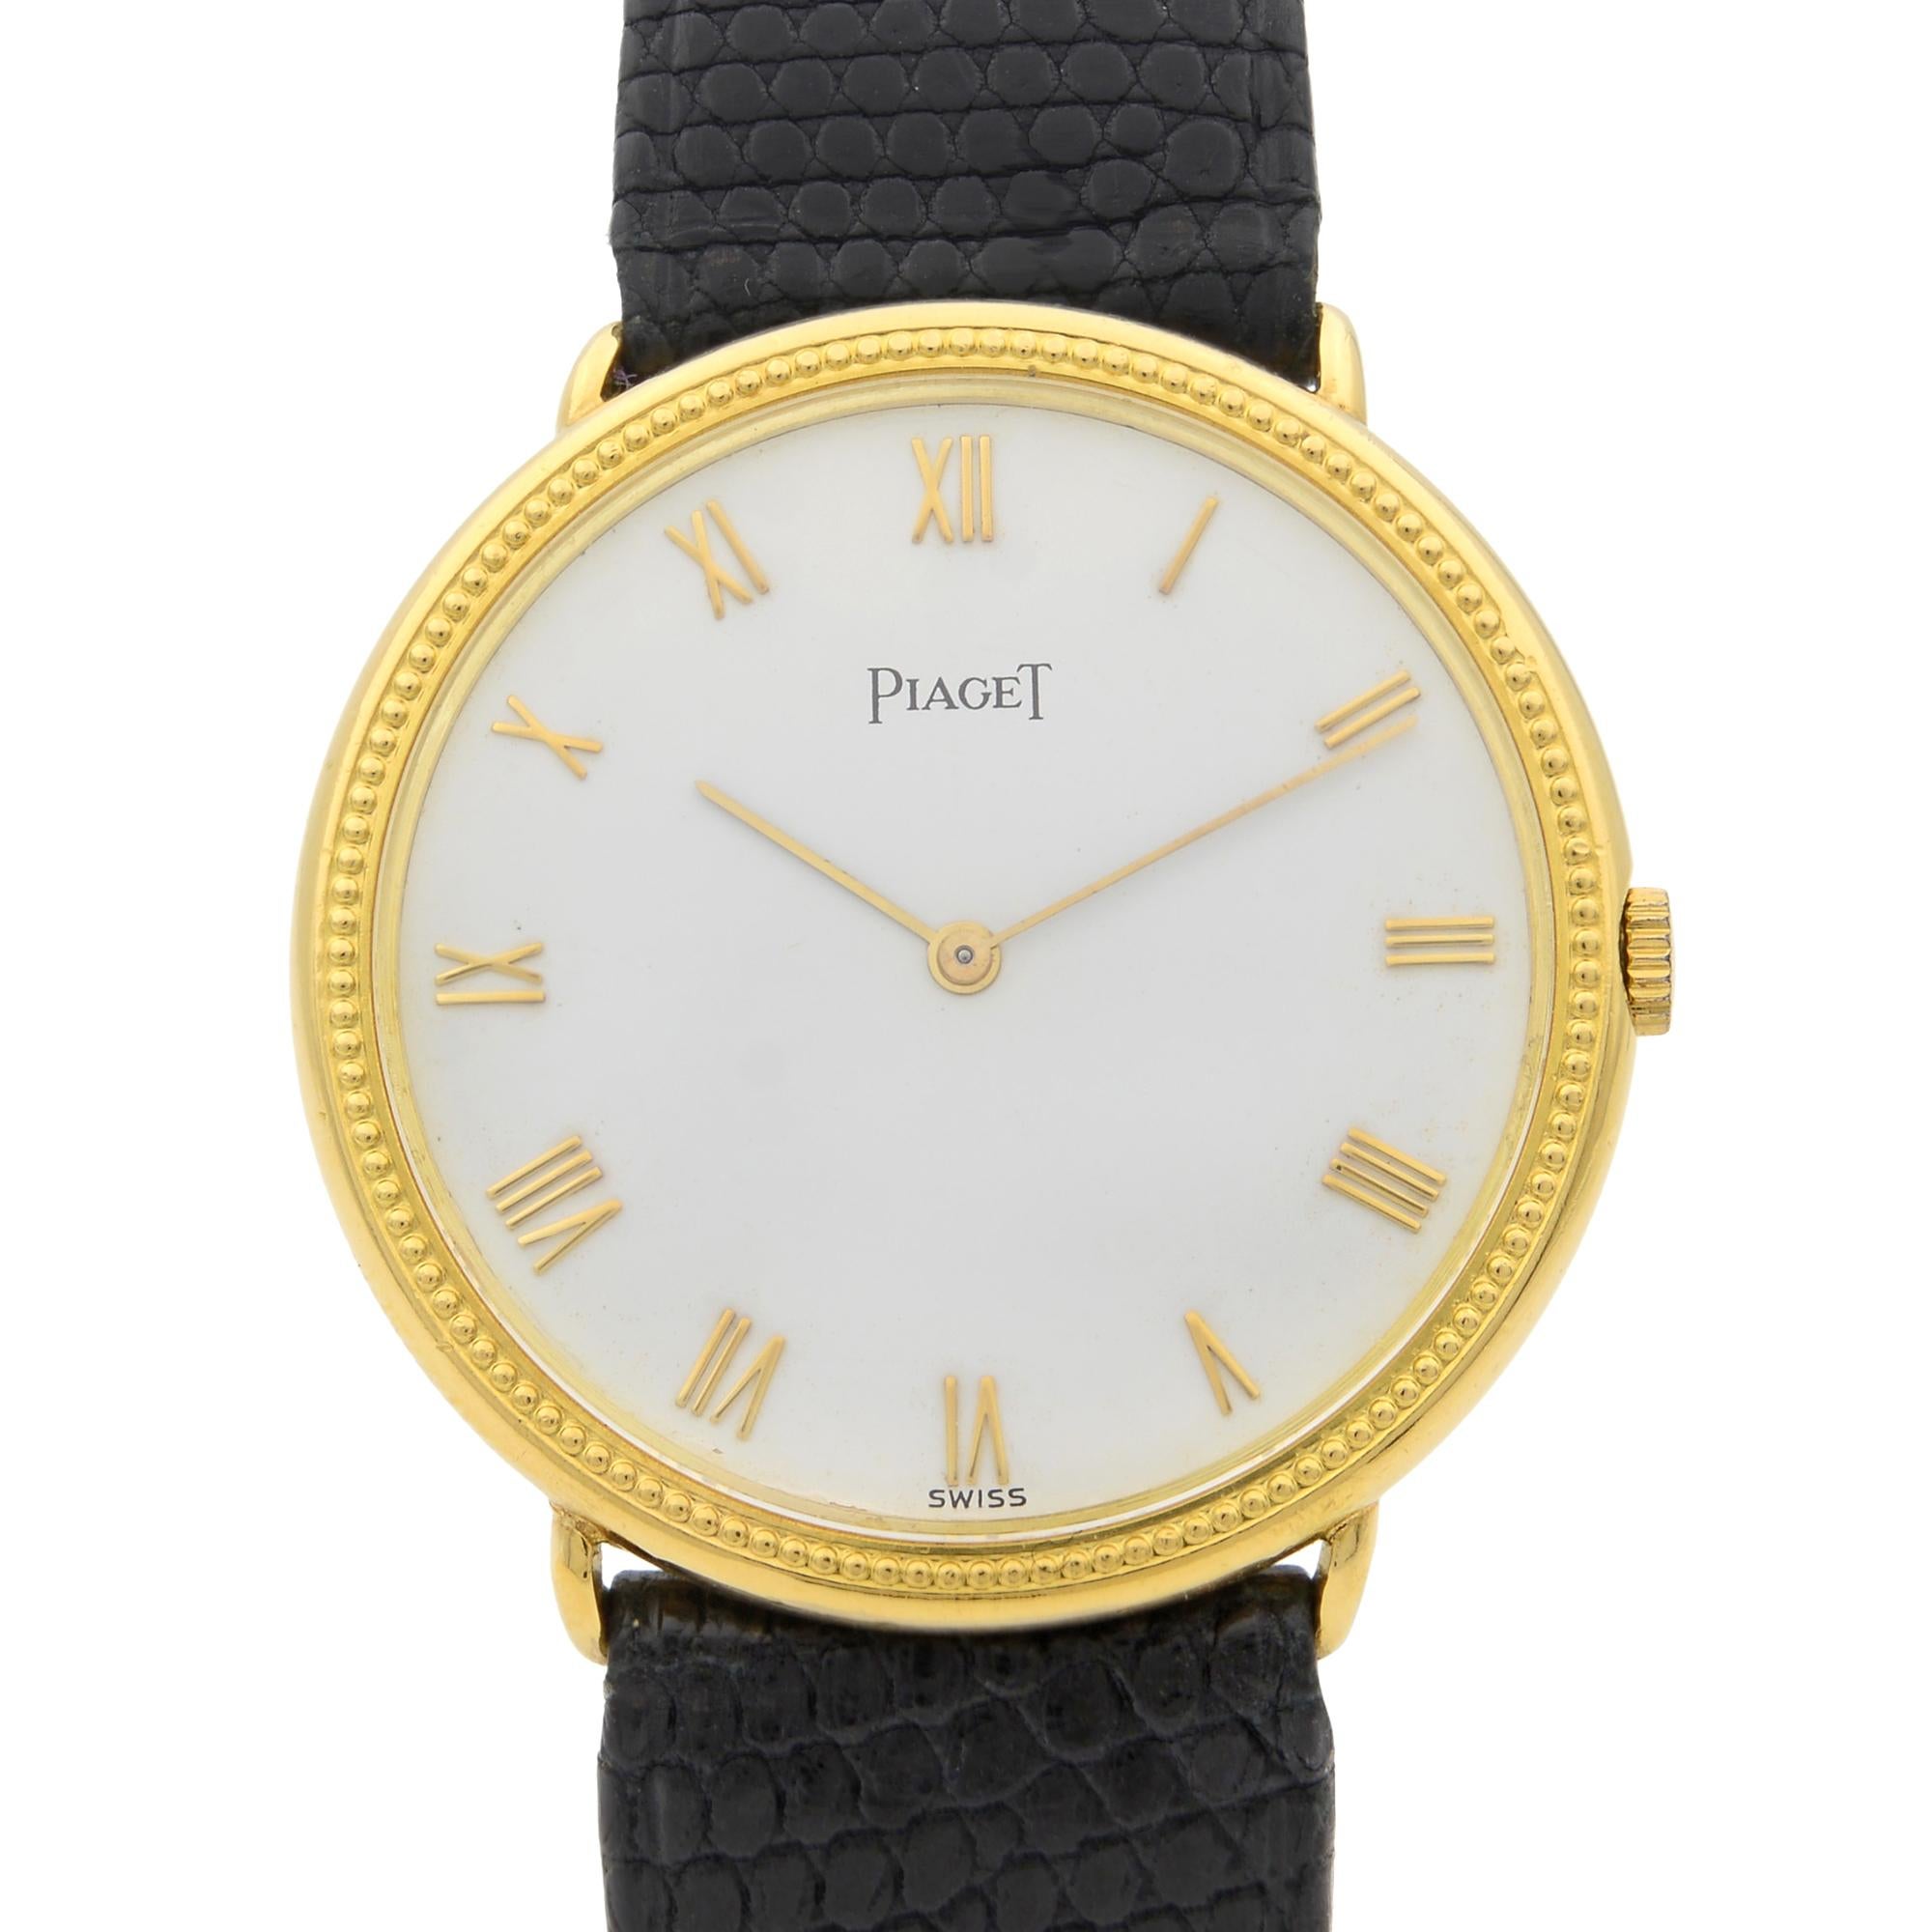 This pre-owned Piaget  90231 is a beautiful men's timepiece that is powered by mechanical (hand-winding) movement which is cased in a yellow gold case. It has a round shape face, no features dial and has hand roman numerals style markers. It is